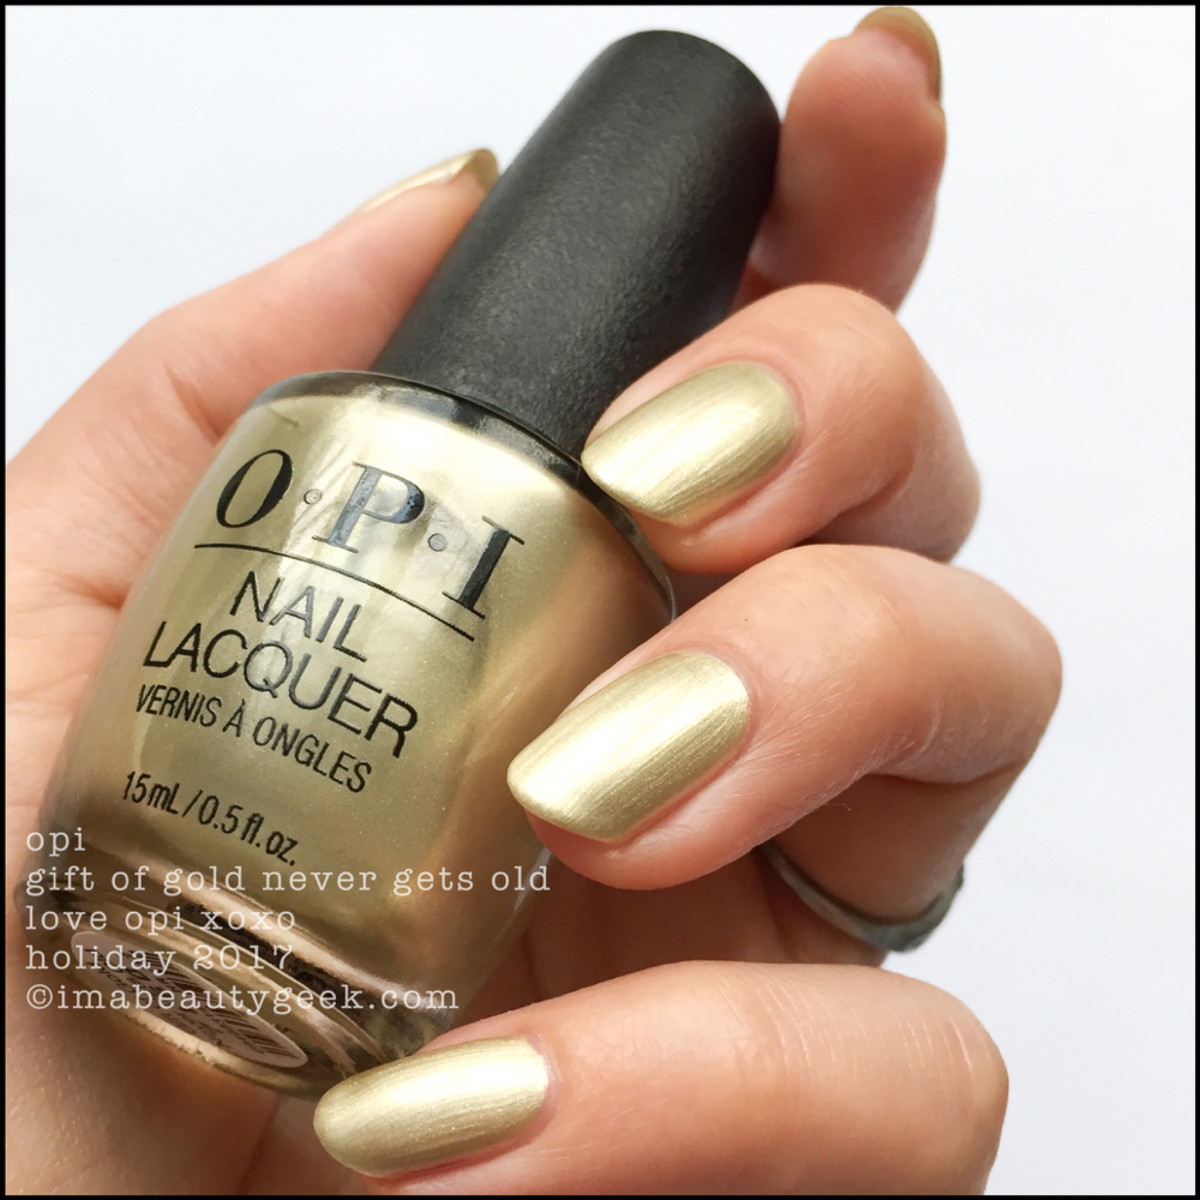 OPI Gift of Gold Never Gets Old 1 - Love OPI XOXO Holiday 2017 Collection